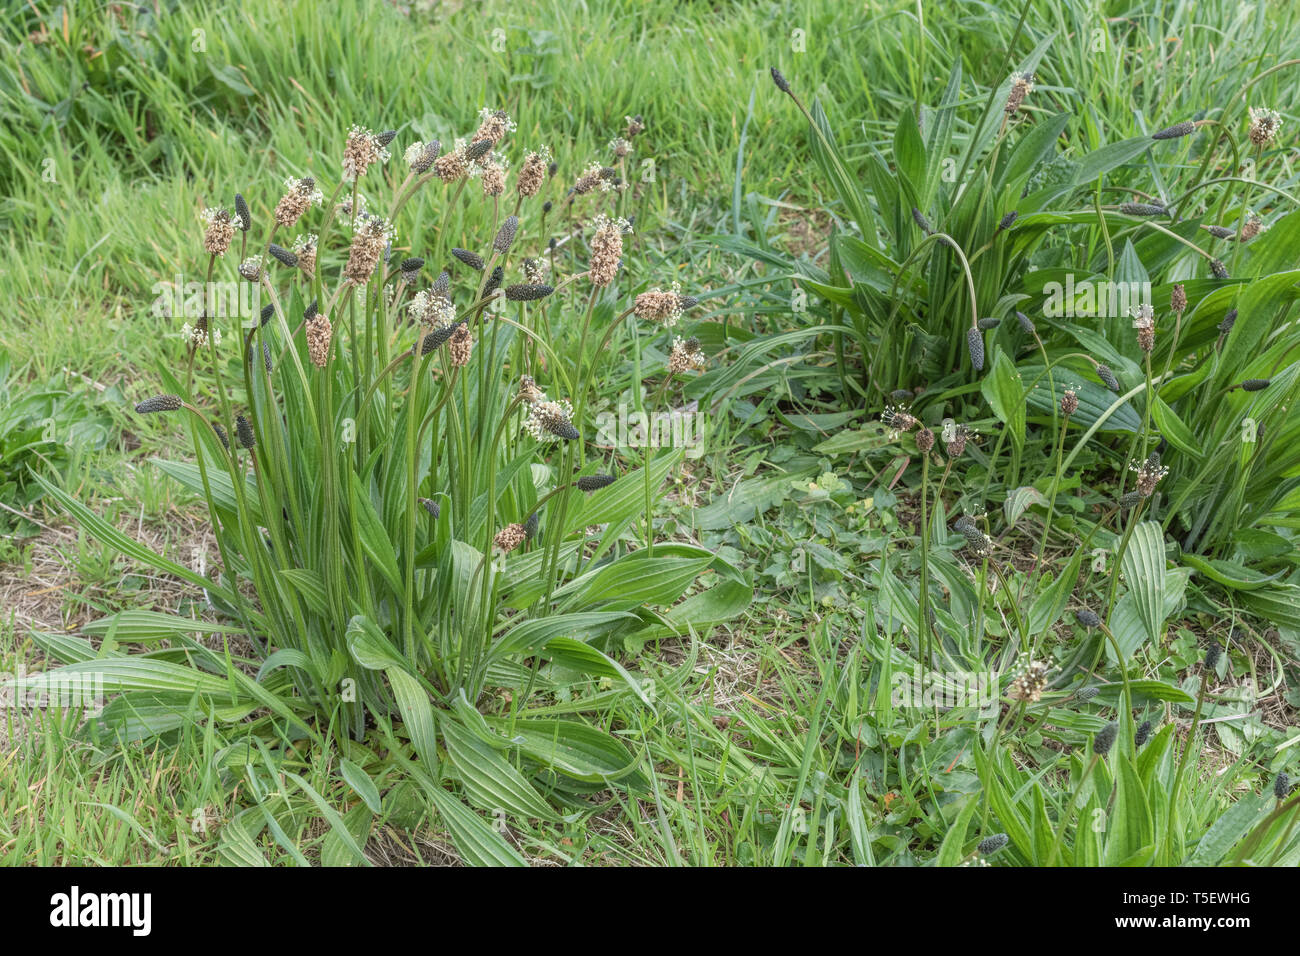 Flowering Ribwort / Plantago lanceolata, Ribwort flowers growing in Spring. Leaves edible as survival food if cooked. Former medicinal plant. Stock Photo